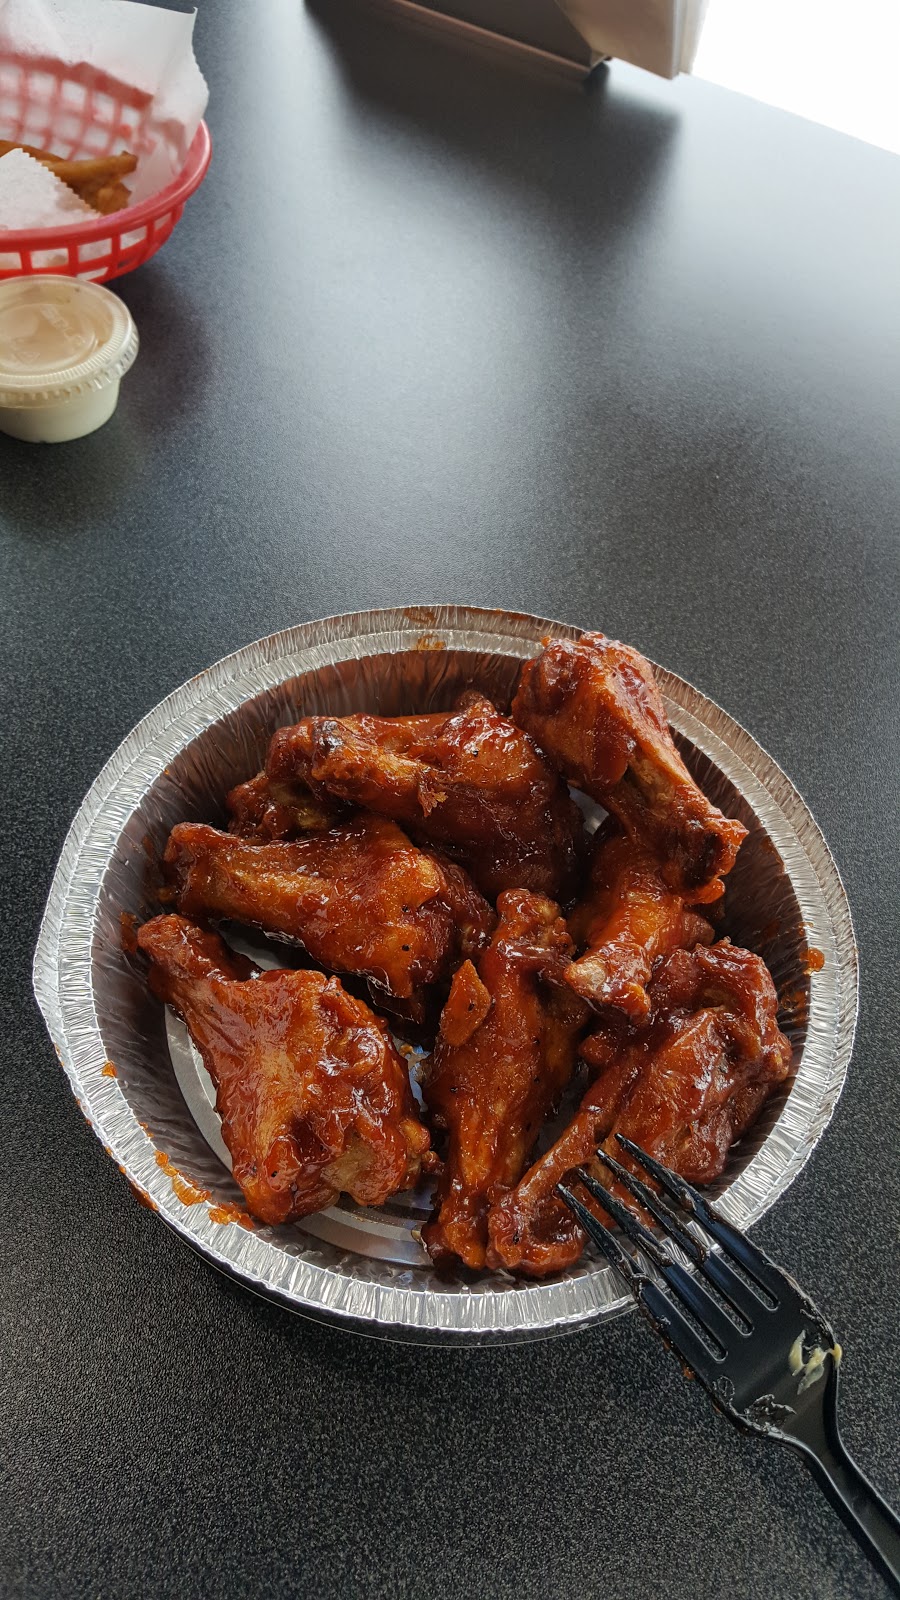 ATL Wings | 1051 Hempstead Turnpike, Franklin Square, NY 11010 | Phone: (516) 775-9464